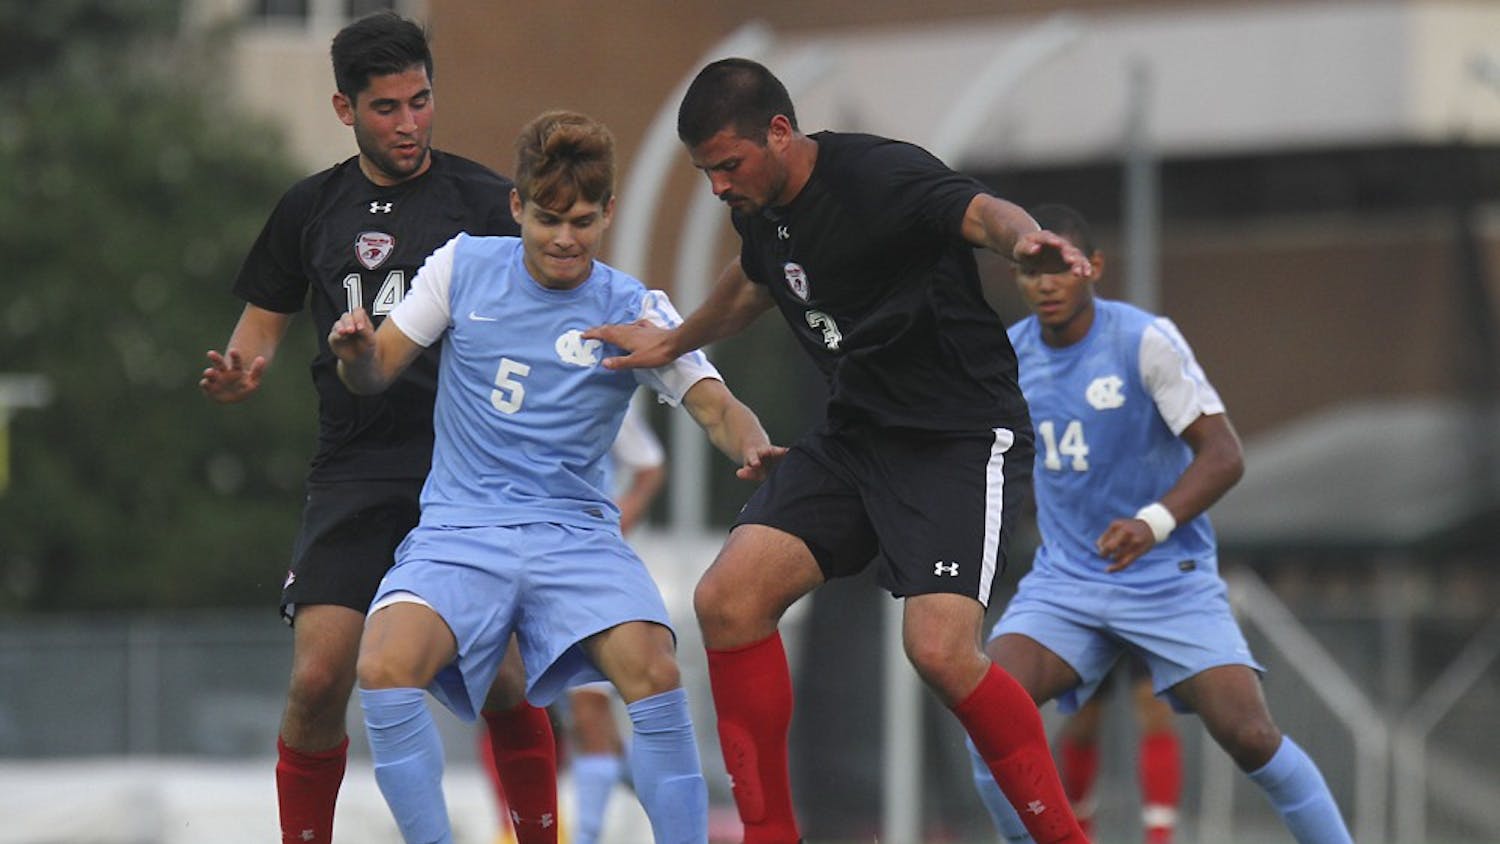 UNC forward, Alan Winn (5), makes a play on the ball against Gardner-Webb defender Matt Bogart (3) and mid-fielder Patrick Gurser (14).  Winn would finish the match with a goal early in the second half.  UNC defeated Gardner-Webb 7-0 Friday night at Fetzer field in an exhibition game.